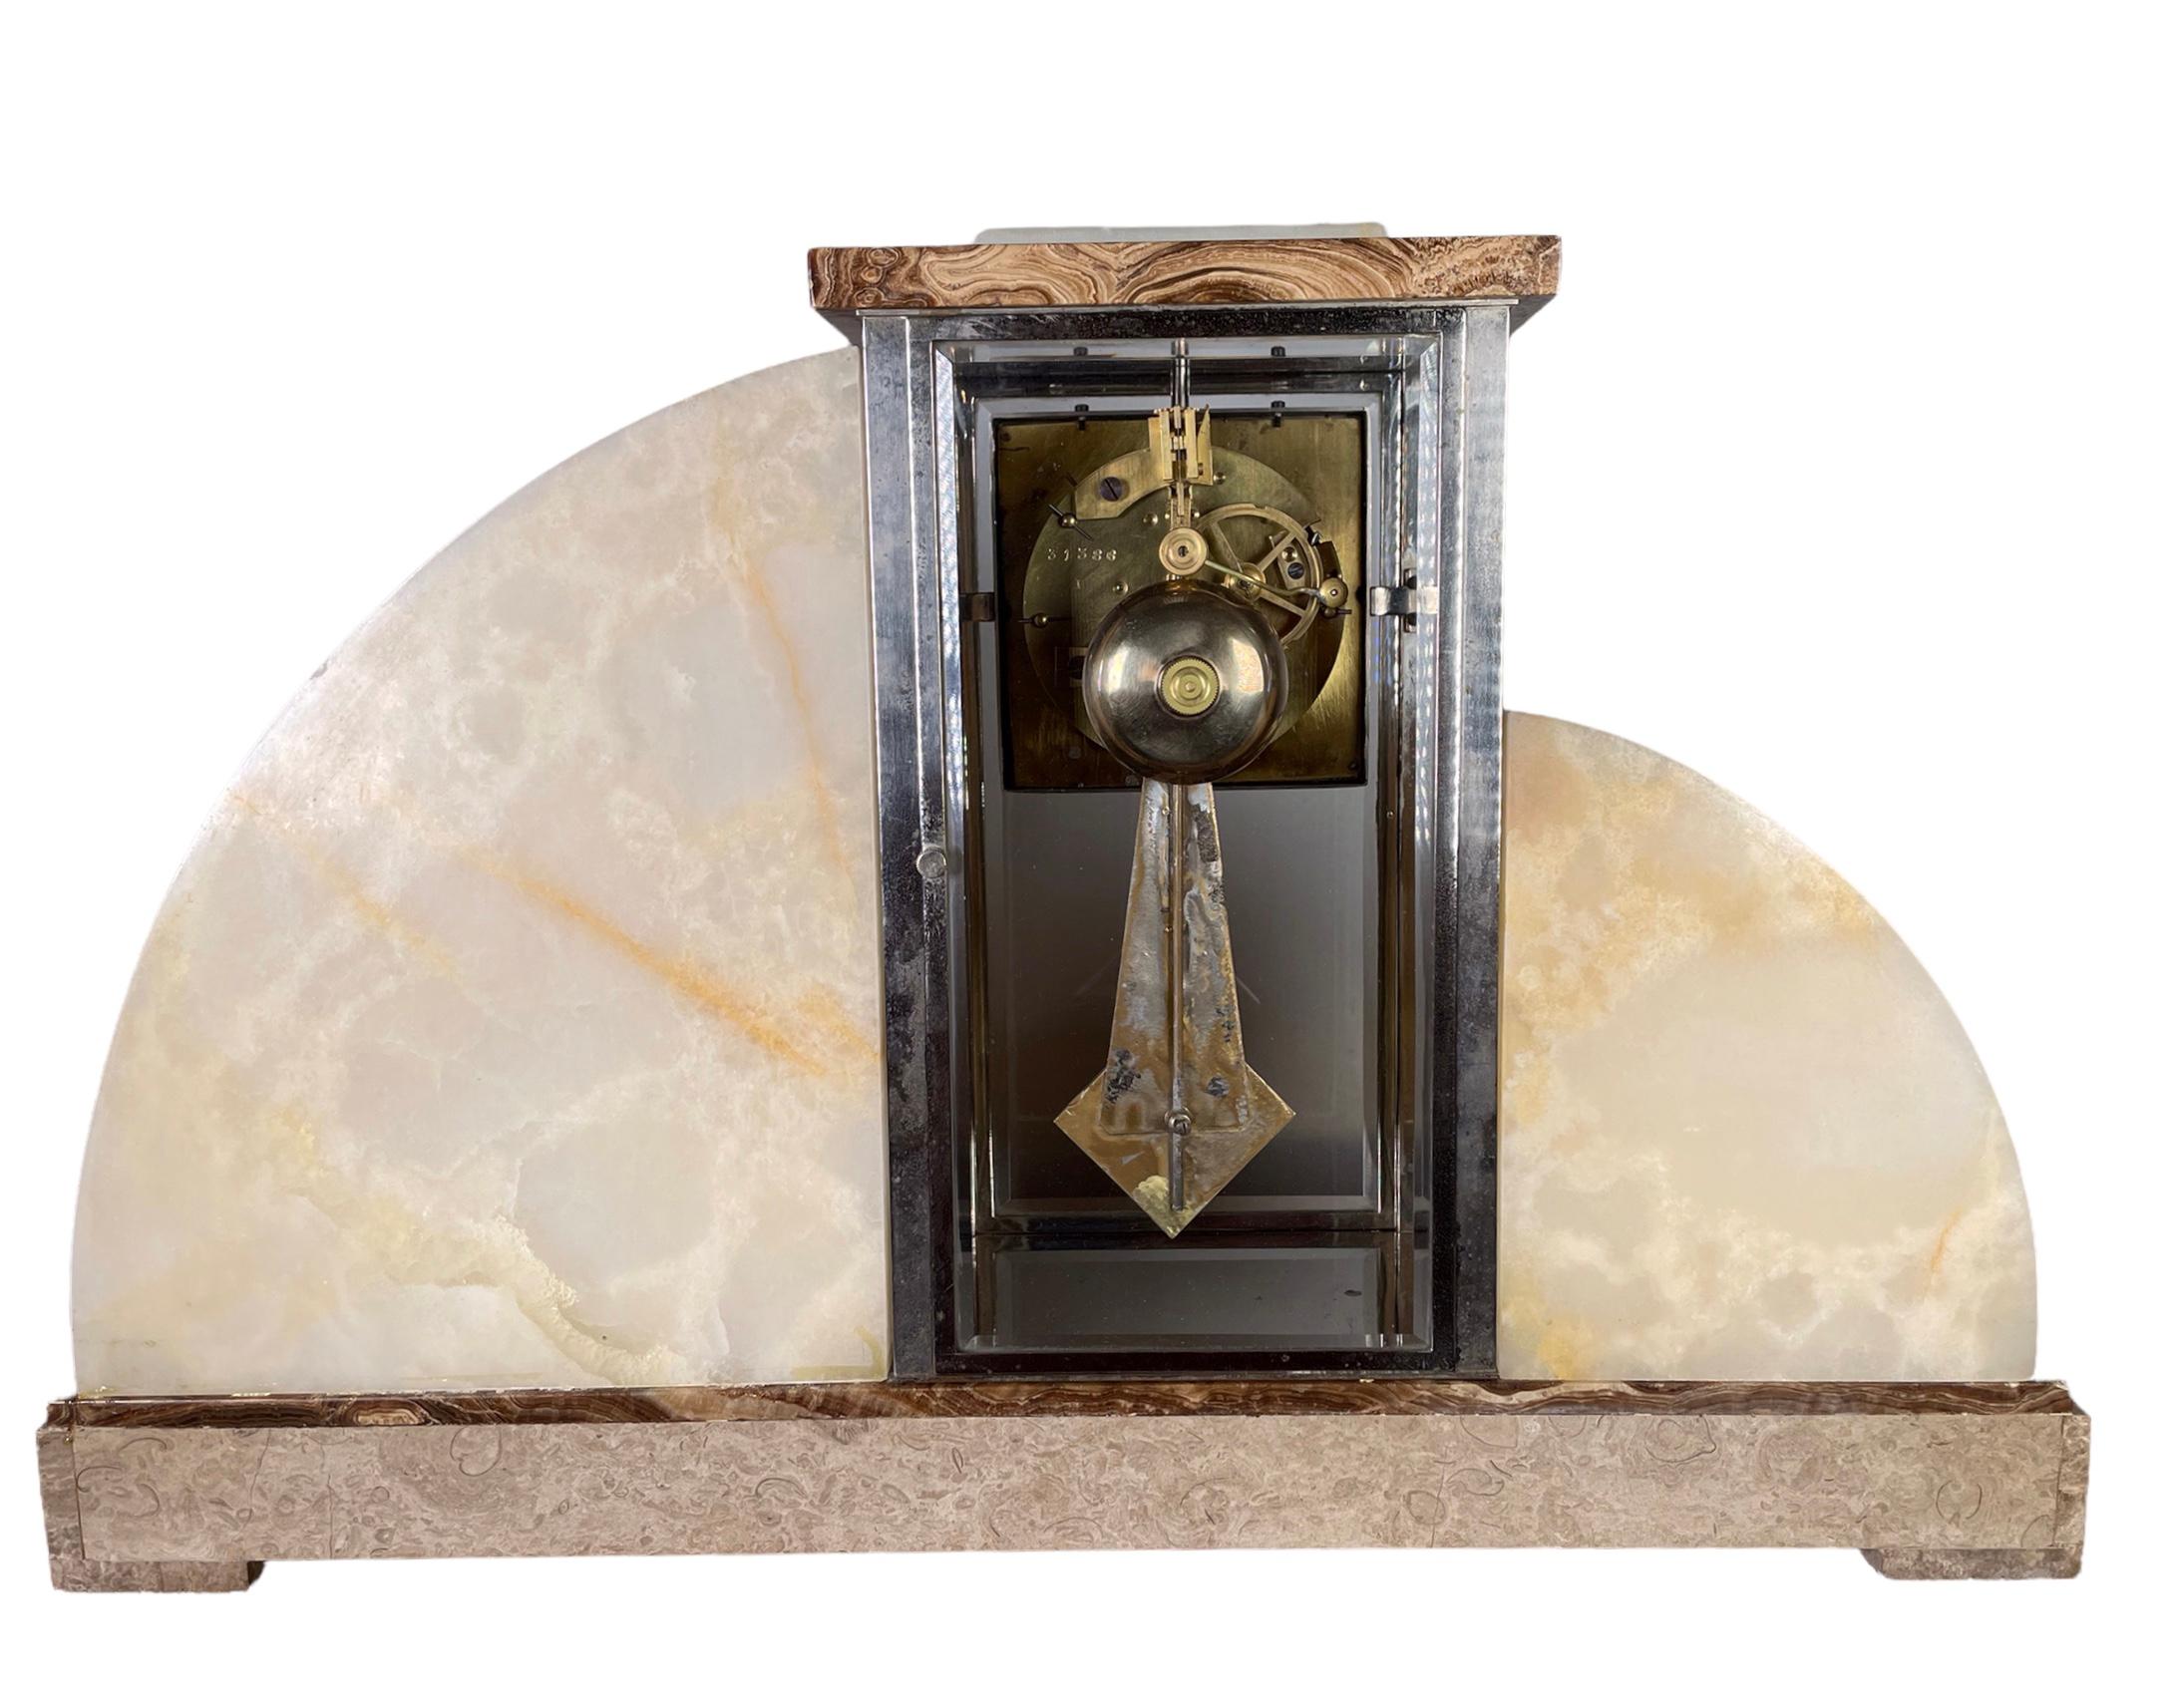 A marble French Art Deco Clock, by the highly regarded Sculptor Demetre Chipurus (unsigned). Other examples of these signed figures exist, as shown in some of the images. 
Two young girls, hold each other as they peer cautiously at a marabou bird.